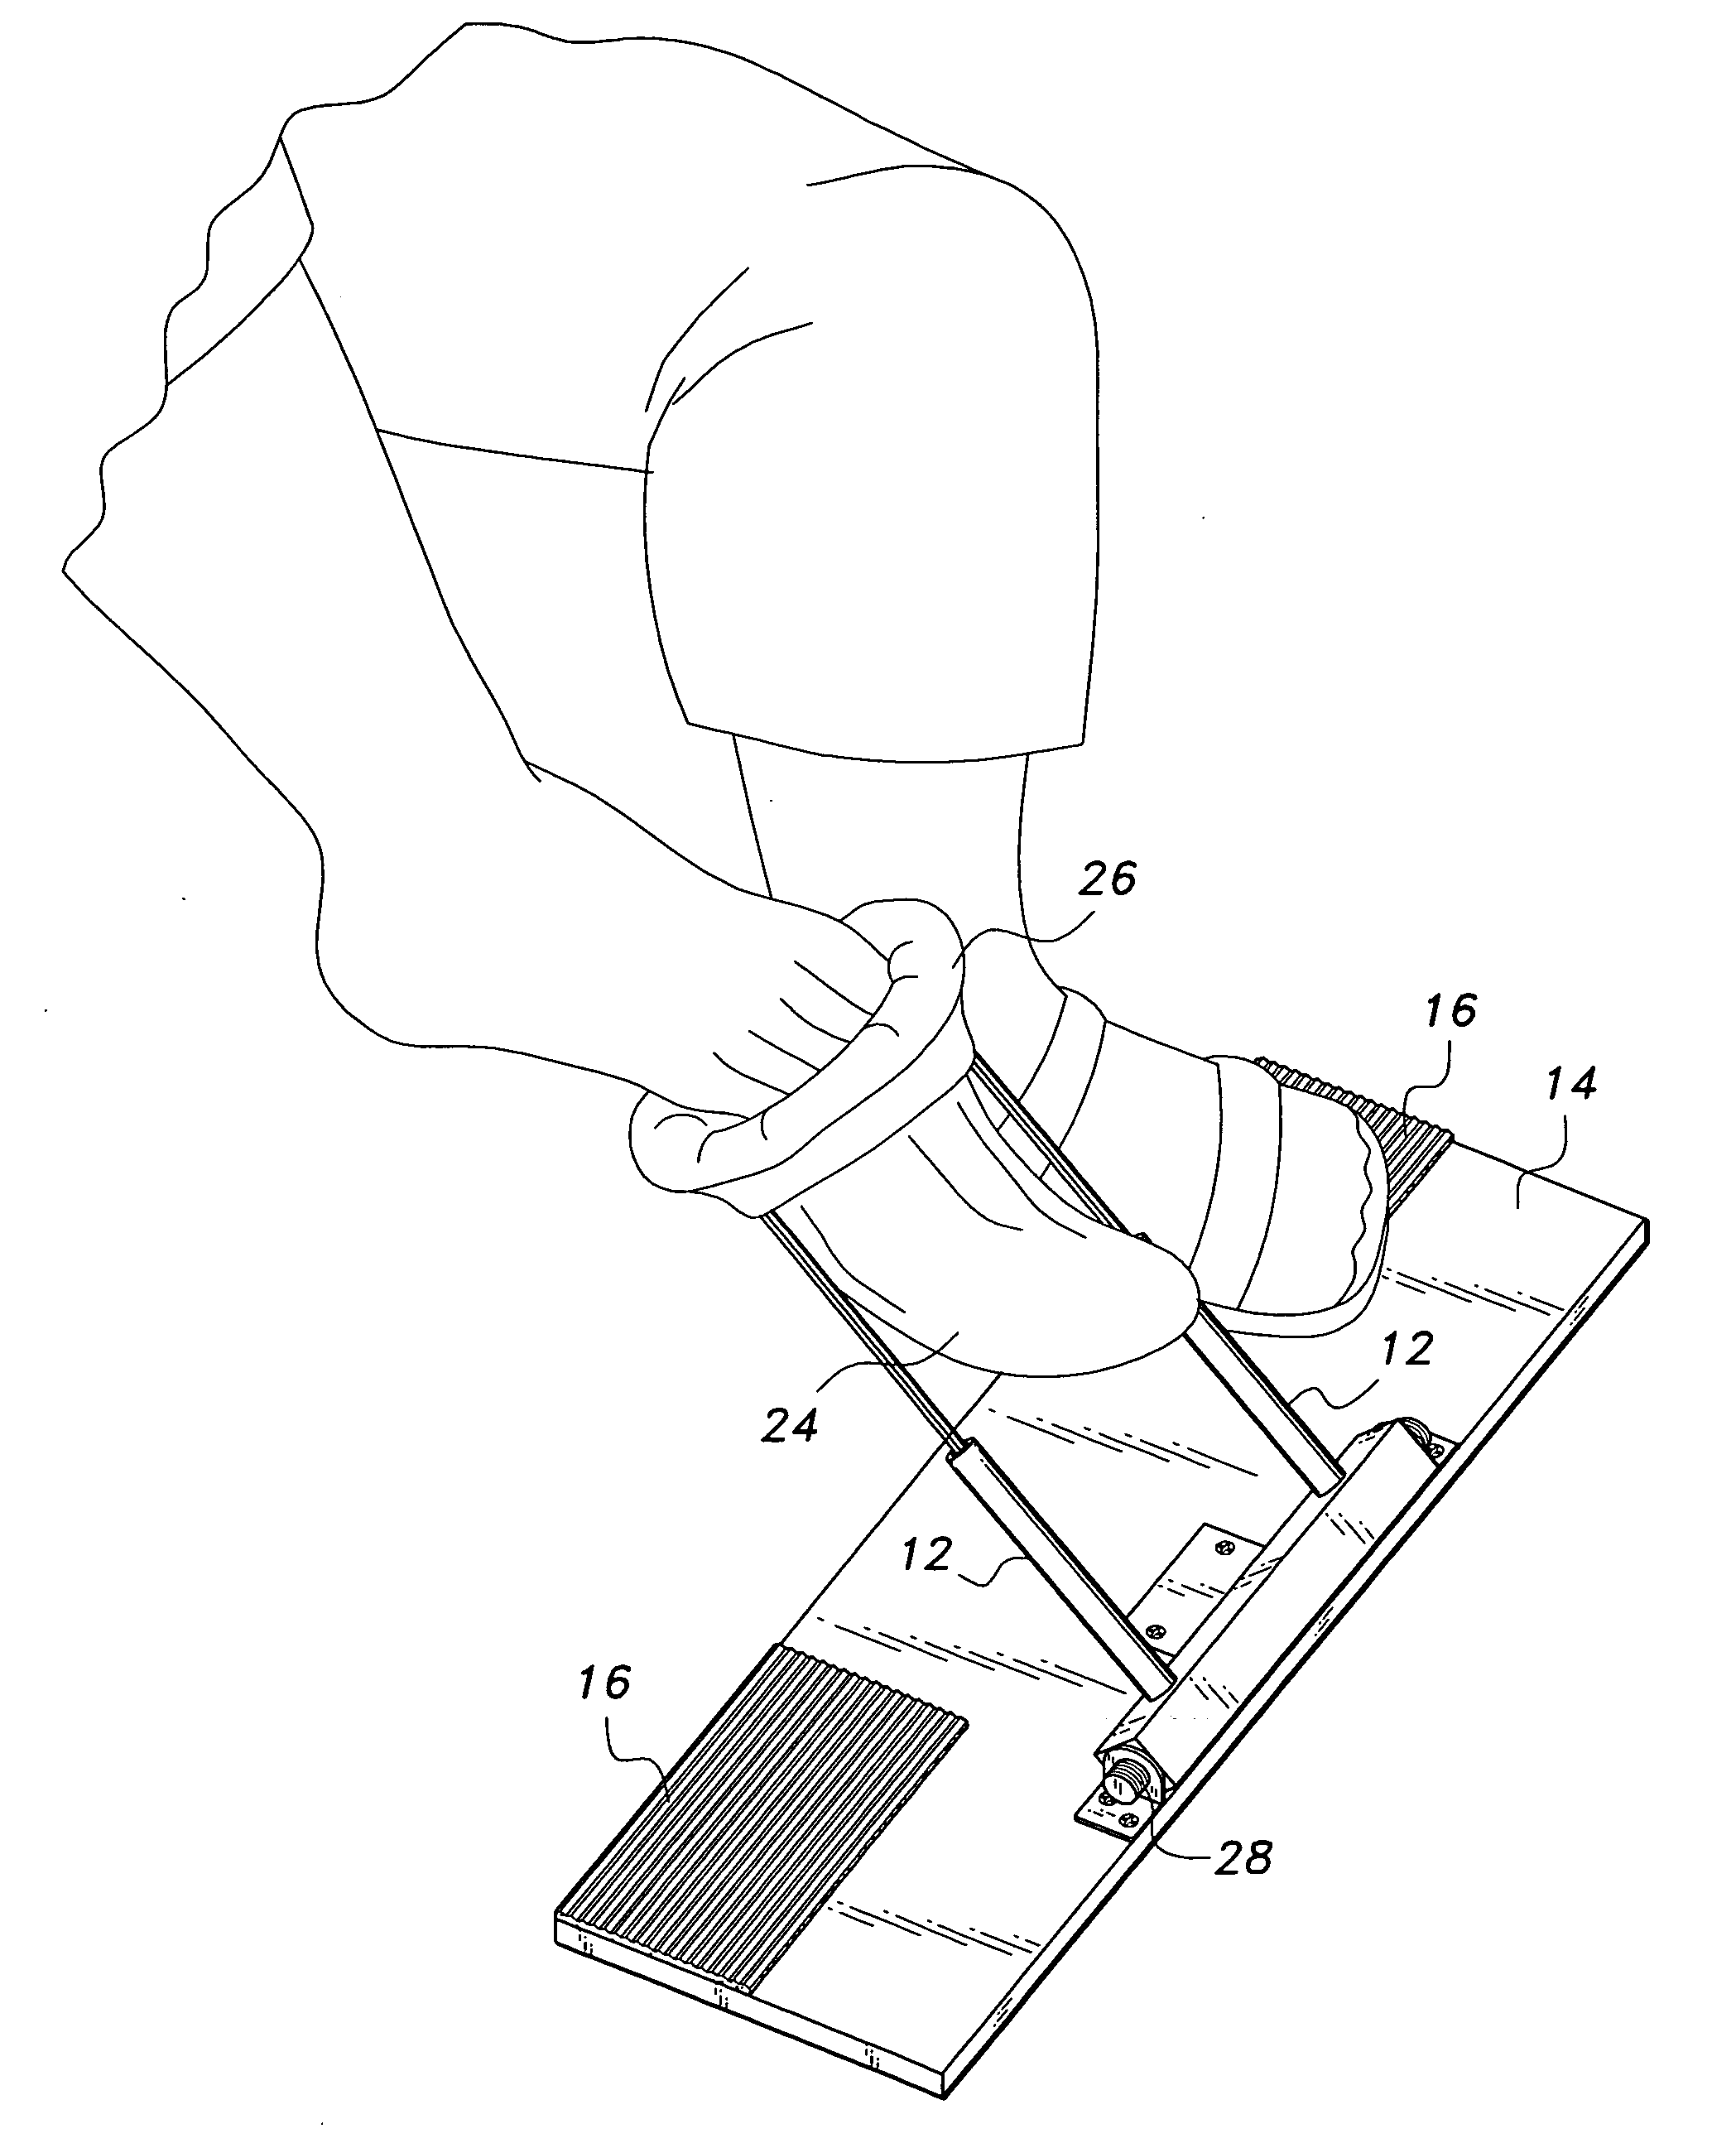 Sock donning device